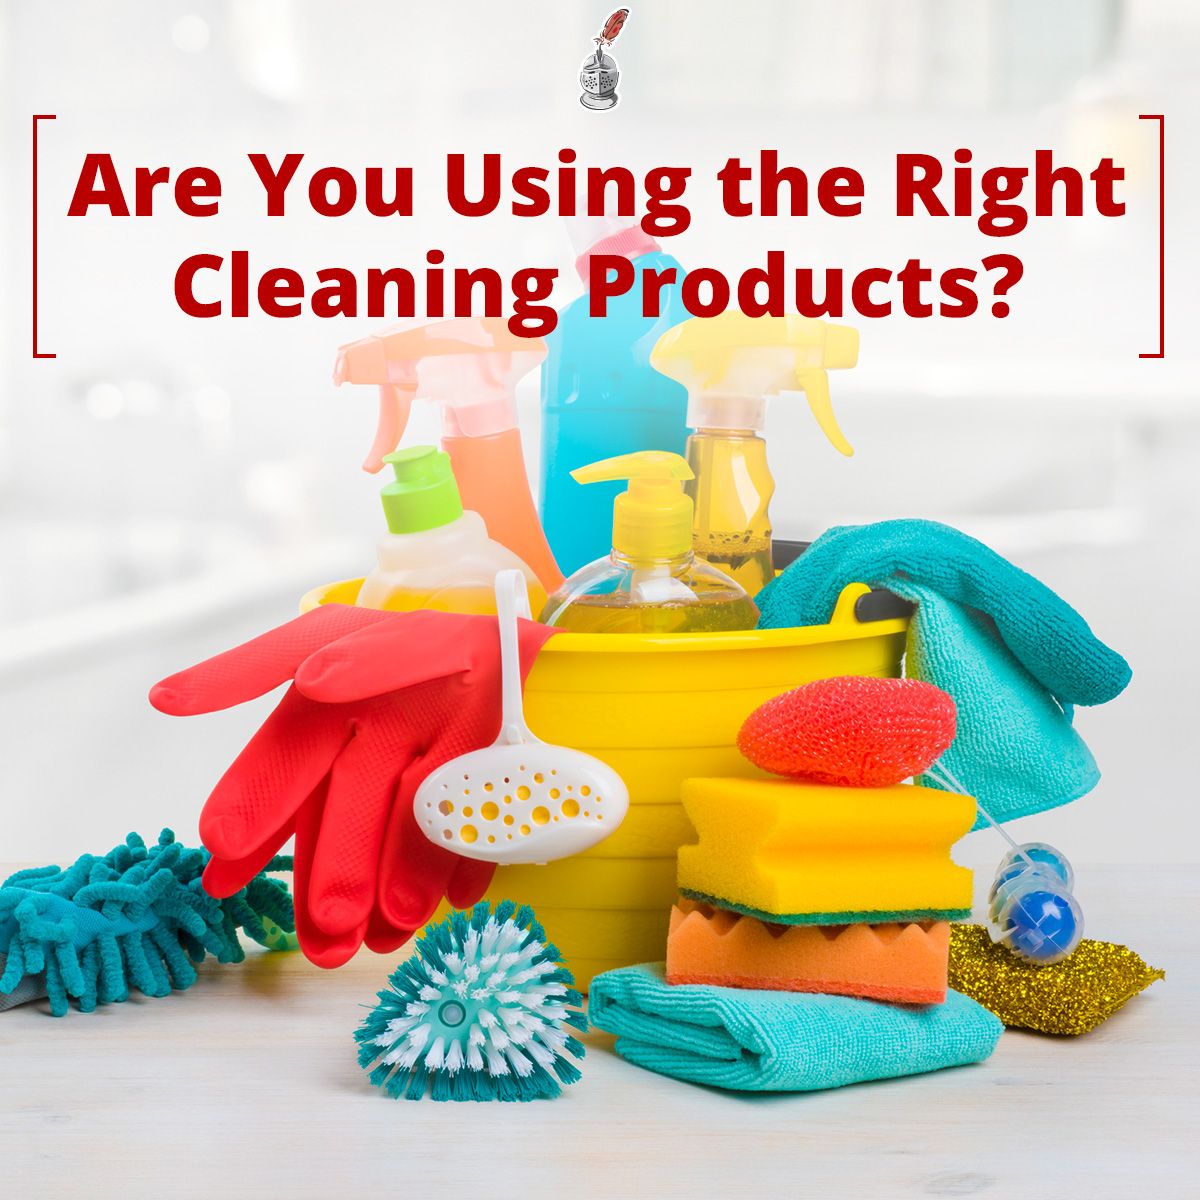 Are You Using the Right Cleaning Products?